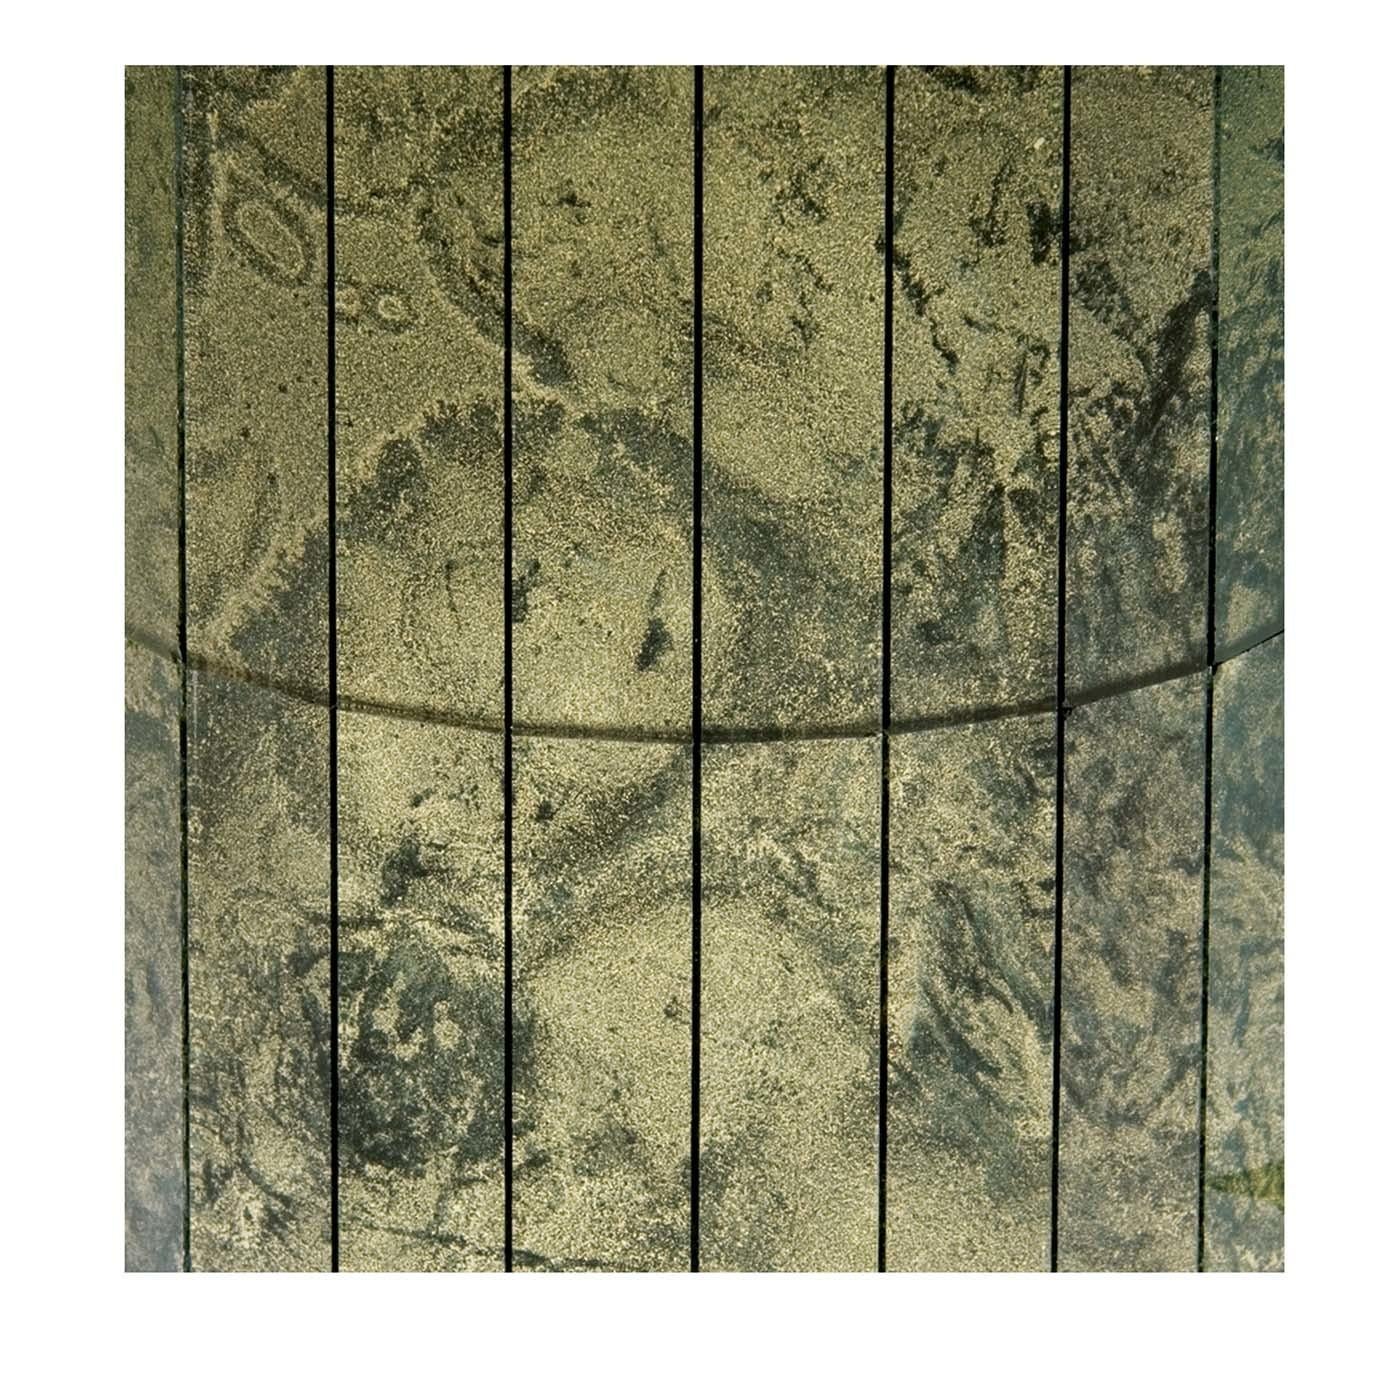 The colors of these panels are reminiscent not only of the pearl itself but of the ocean it comes from. The splashes of green and pearl shades make for a deep and mesmerizing piece that will add depth to any wall in both modern and traditional